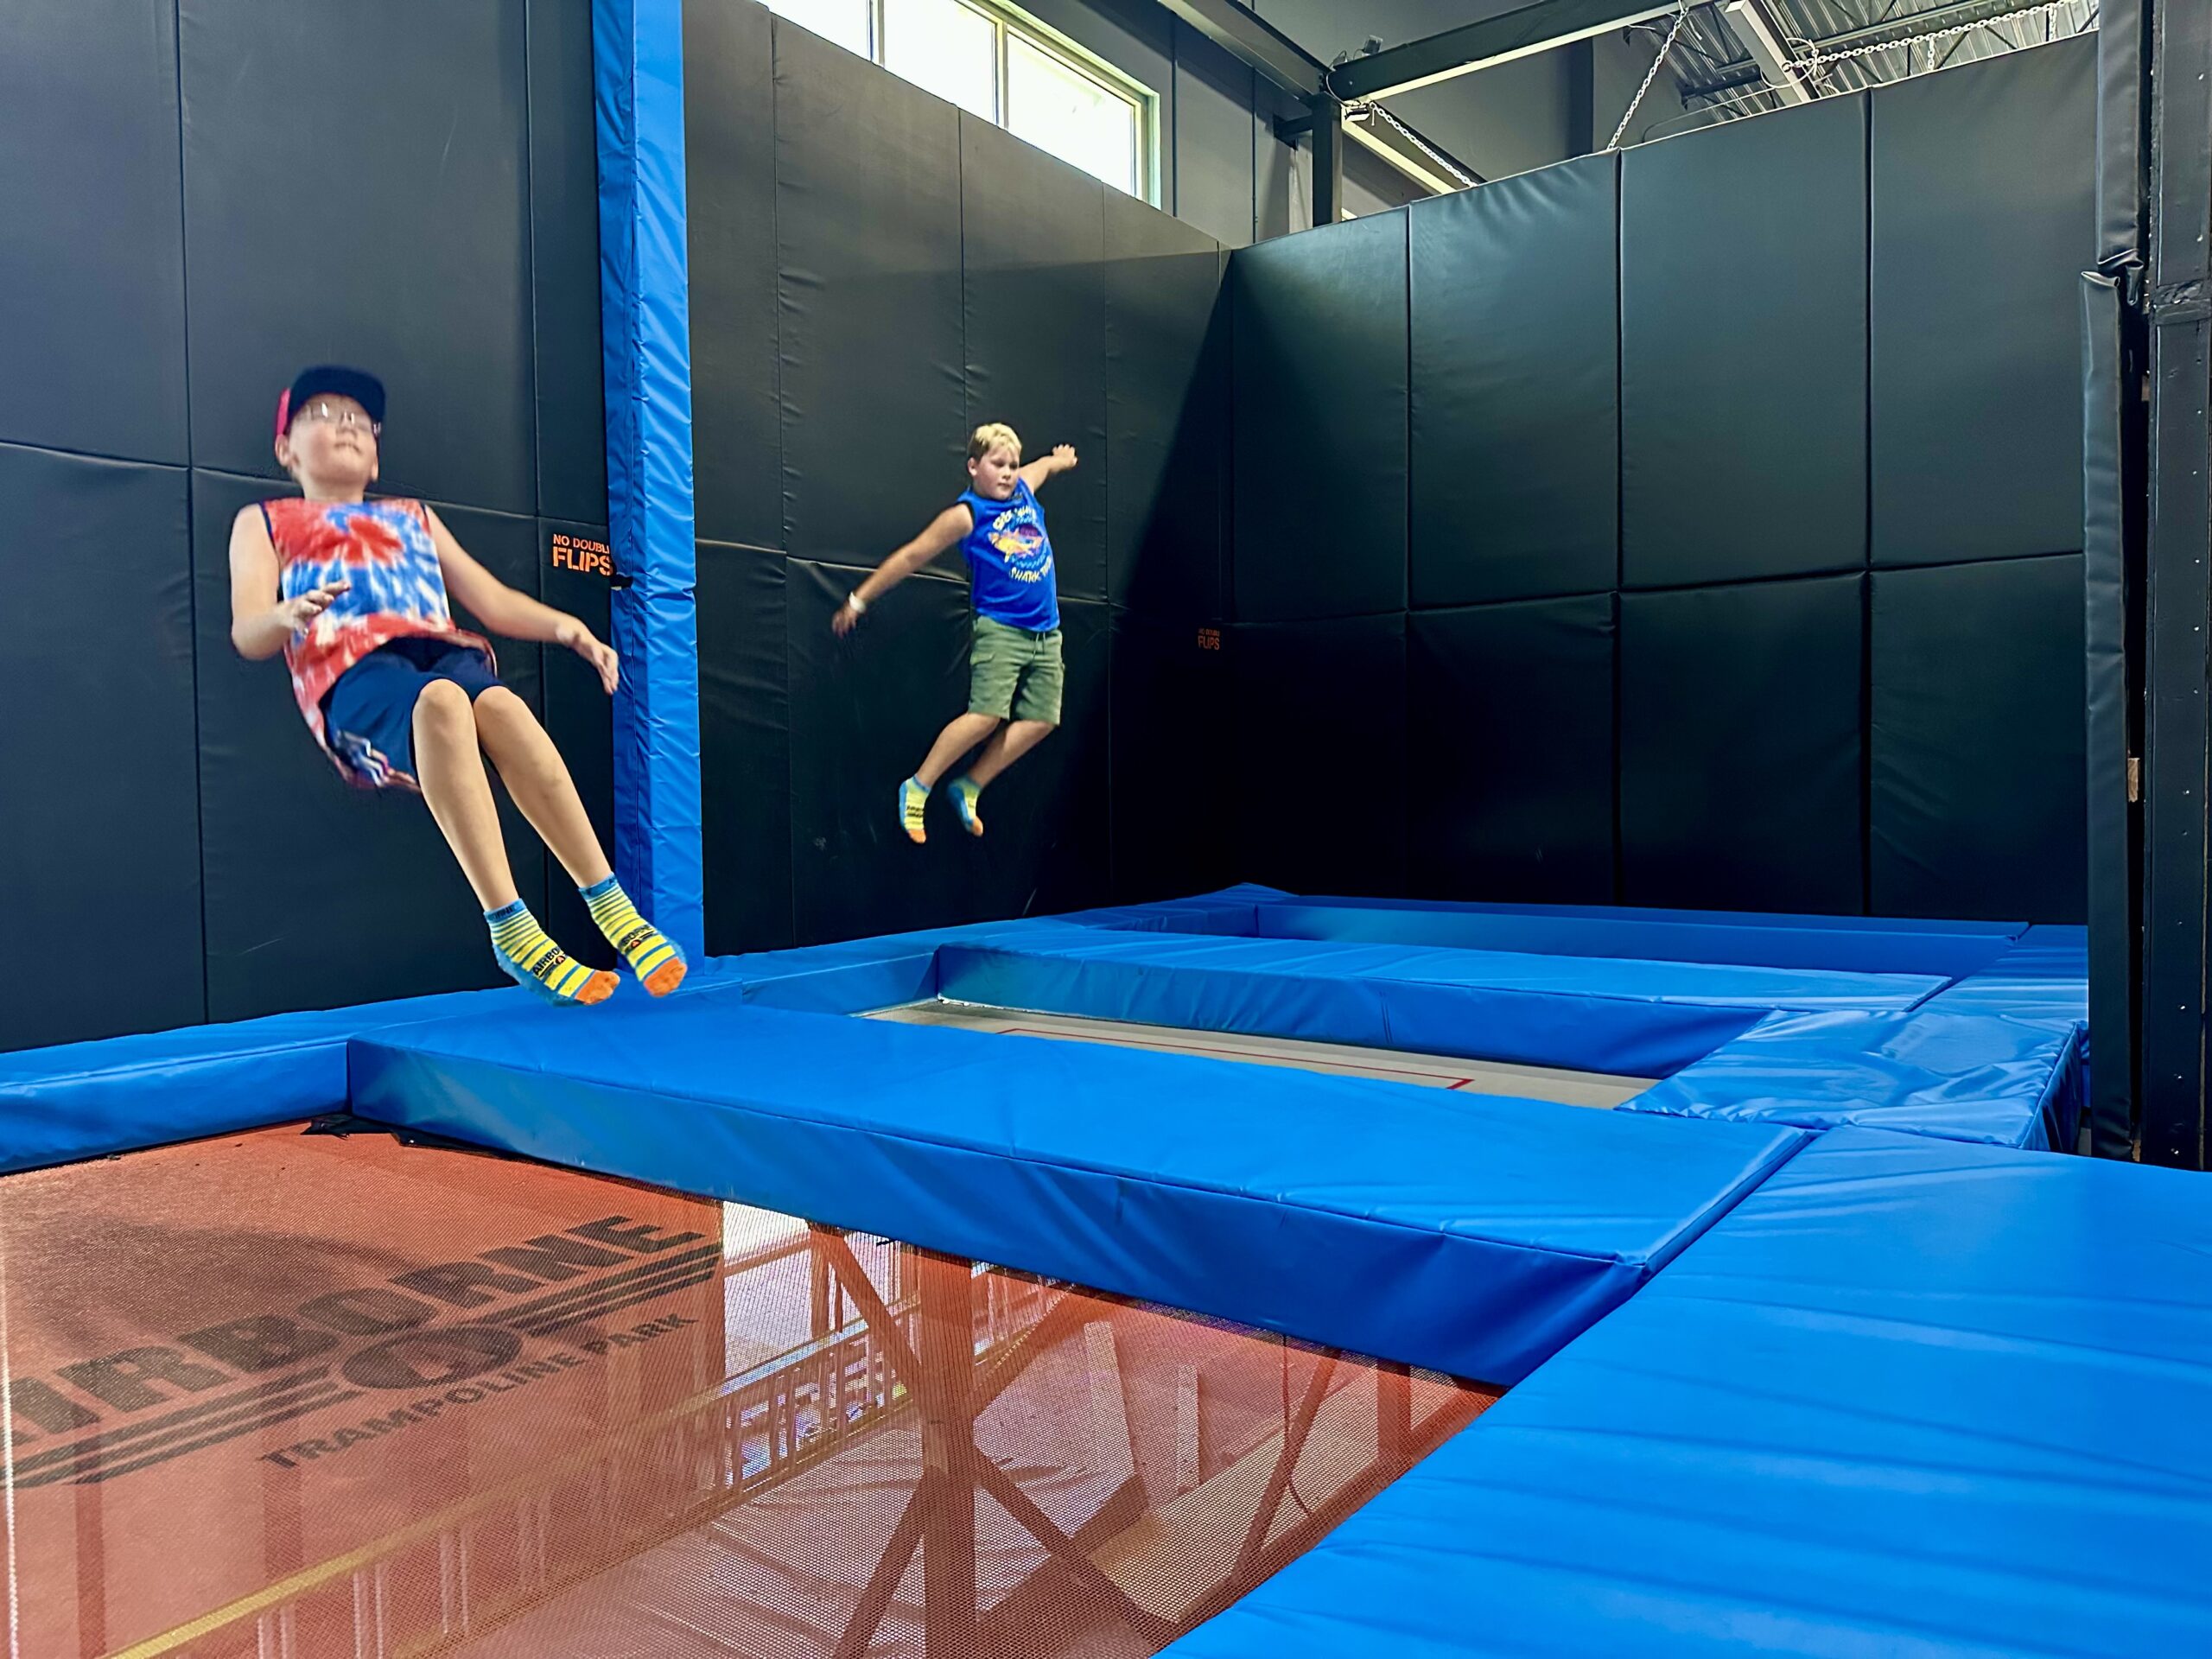 Two young boys bouncing on traTwo young boys bouncing on trampolines in an indoor trampoline park.mpolines in an indoor trampoline park.